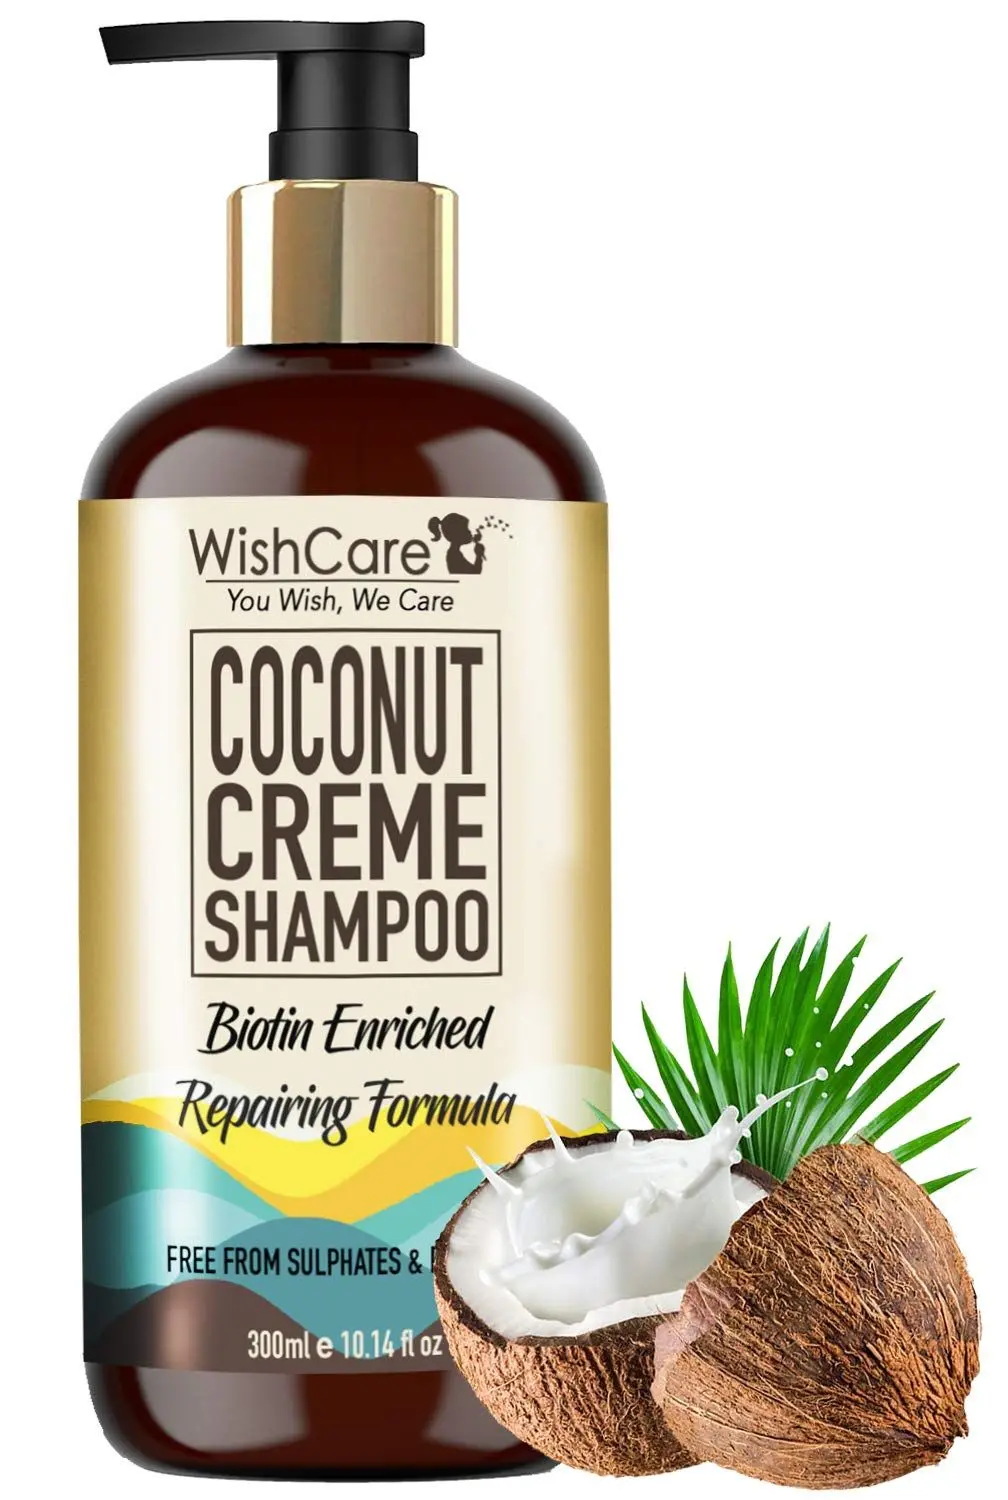 WishCare Coconut Creme Shampoo - Repairing Formula - Free from Sulphates & Parabens (300 ml) (Enriched with Biotin)